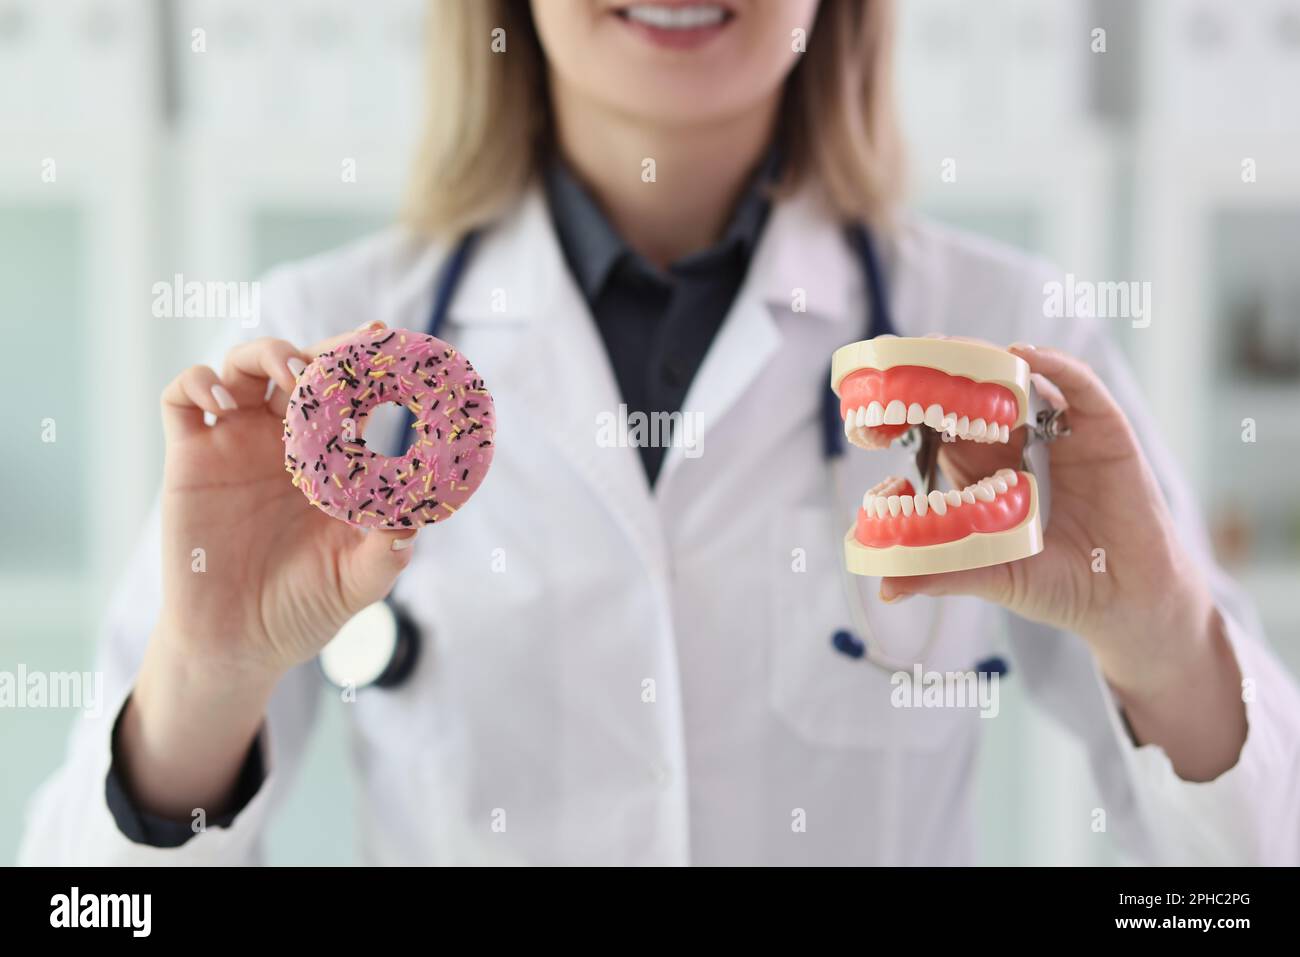 Dentist explains impact of sweets on teeth health in clinic Stock Photo